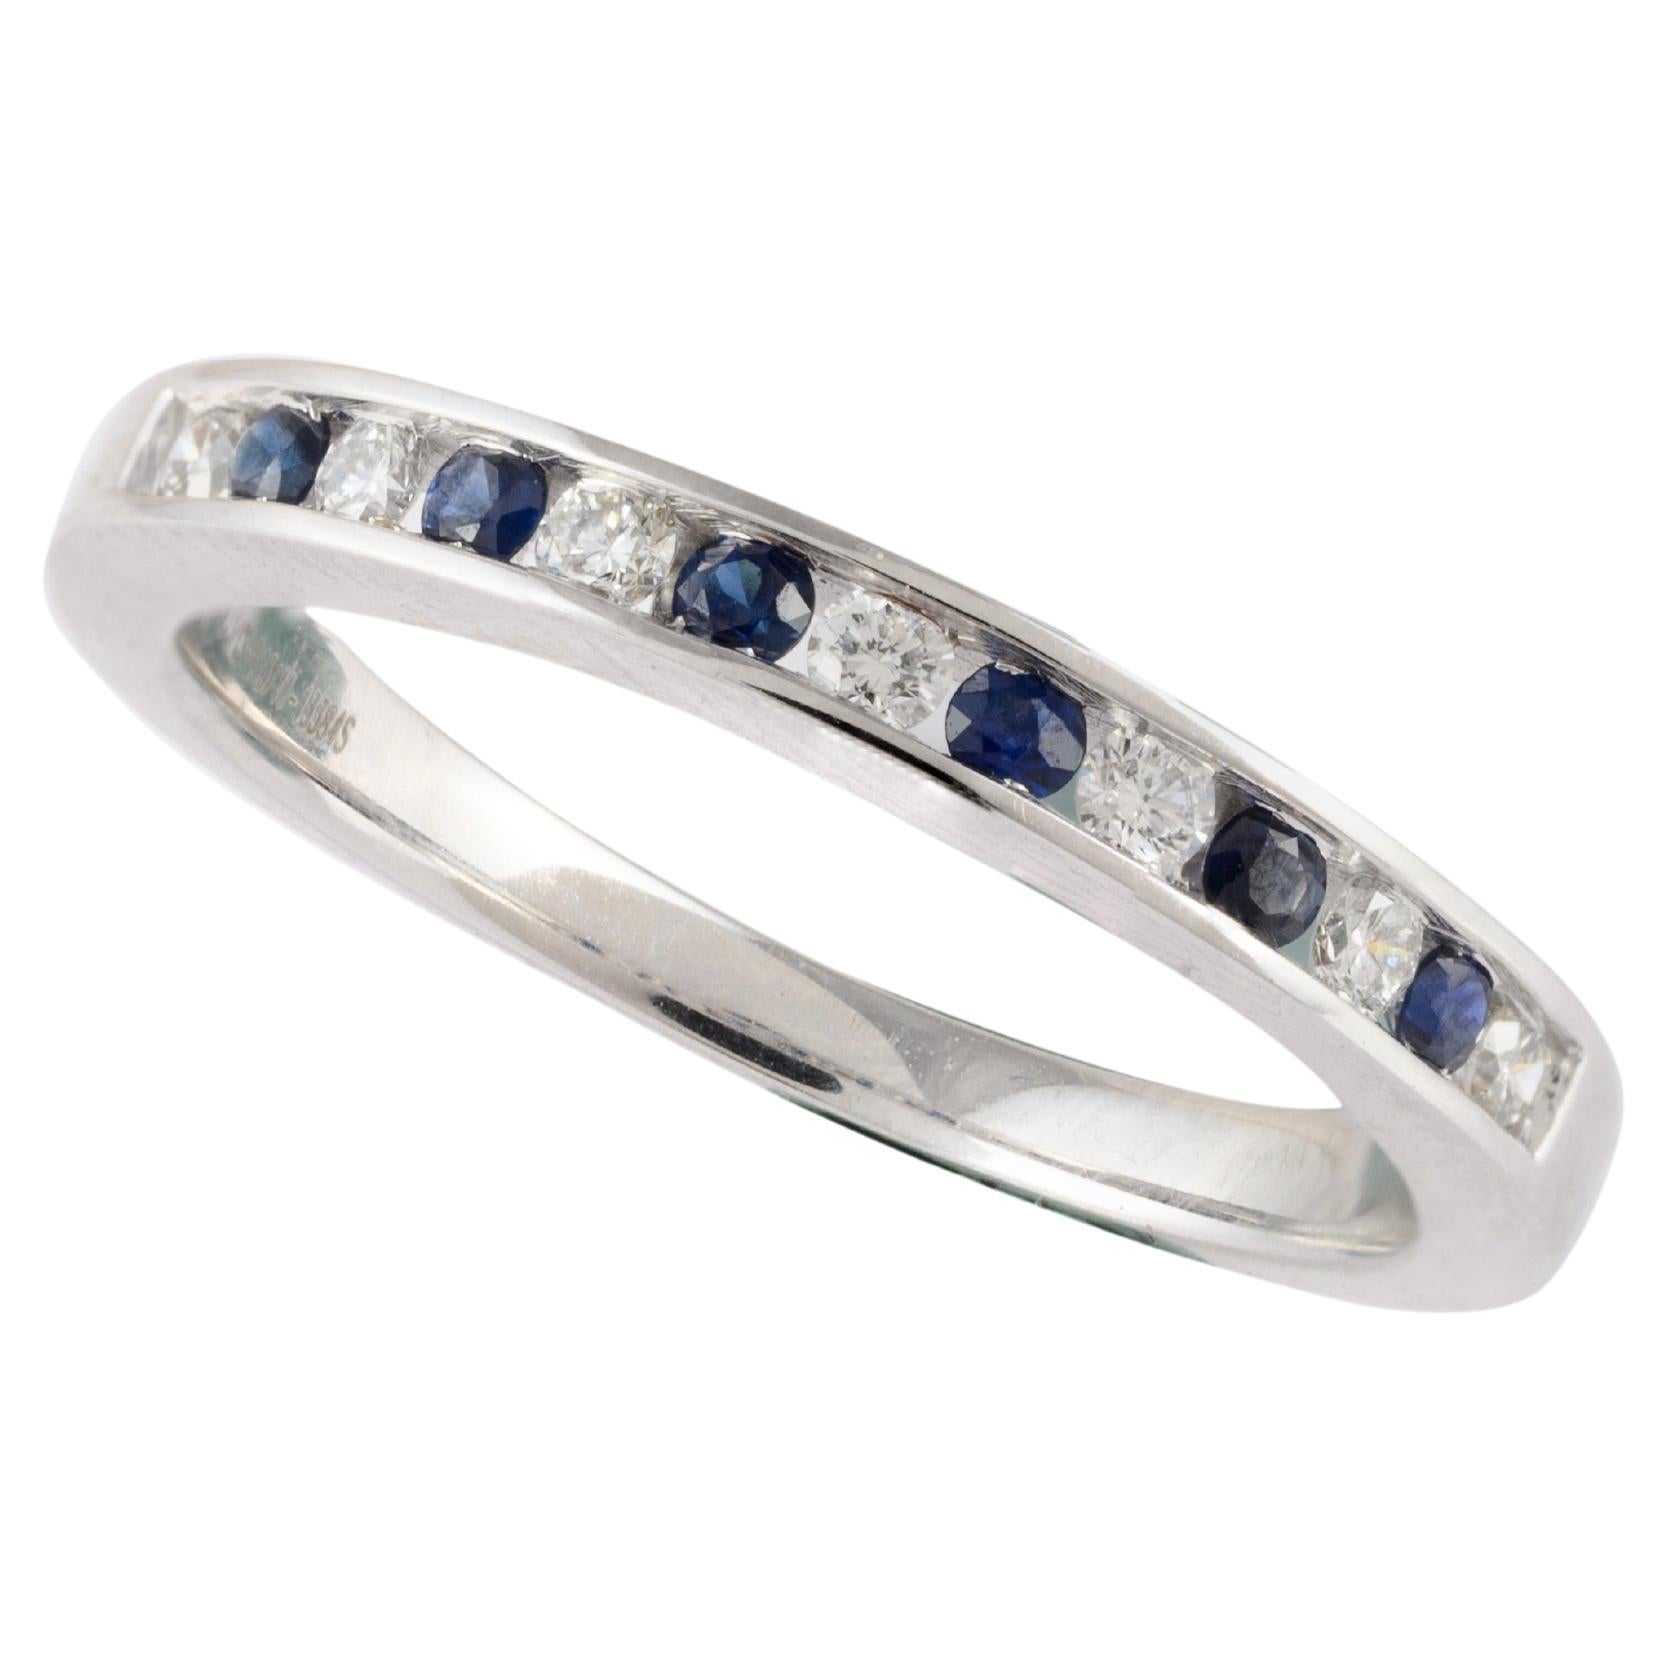 Brilliant Cut Diamond Sapphire Eternity Ring Studded in 18kt Solid White Gold